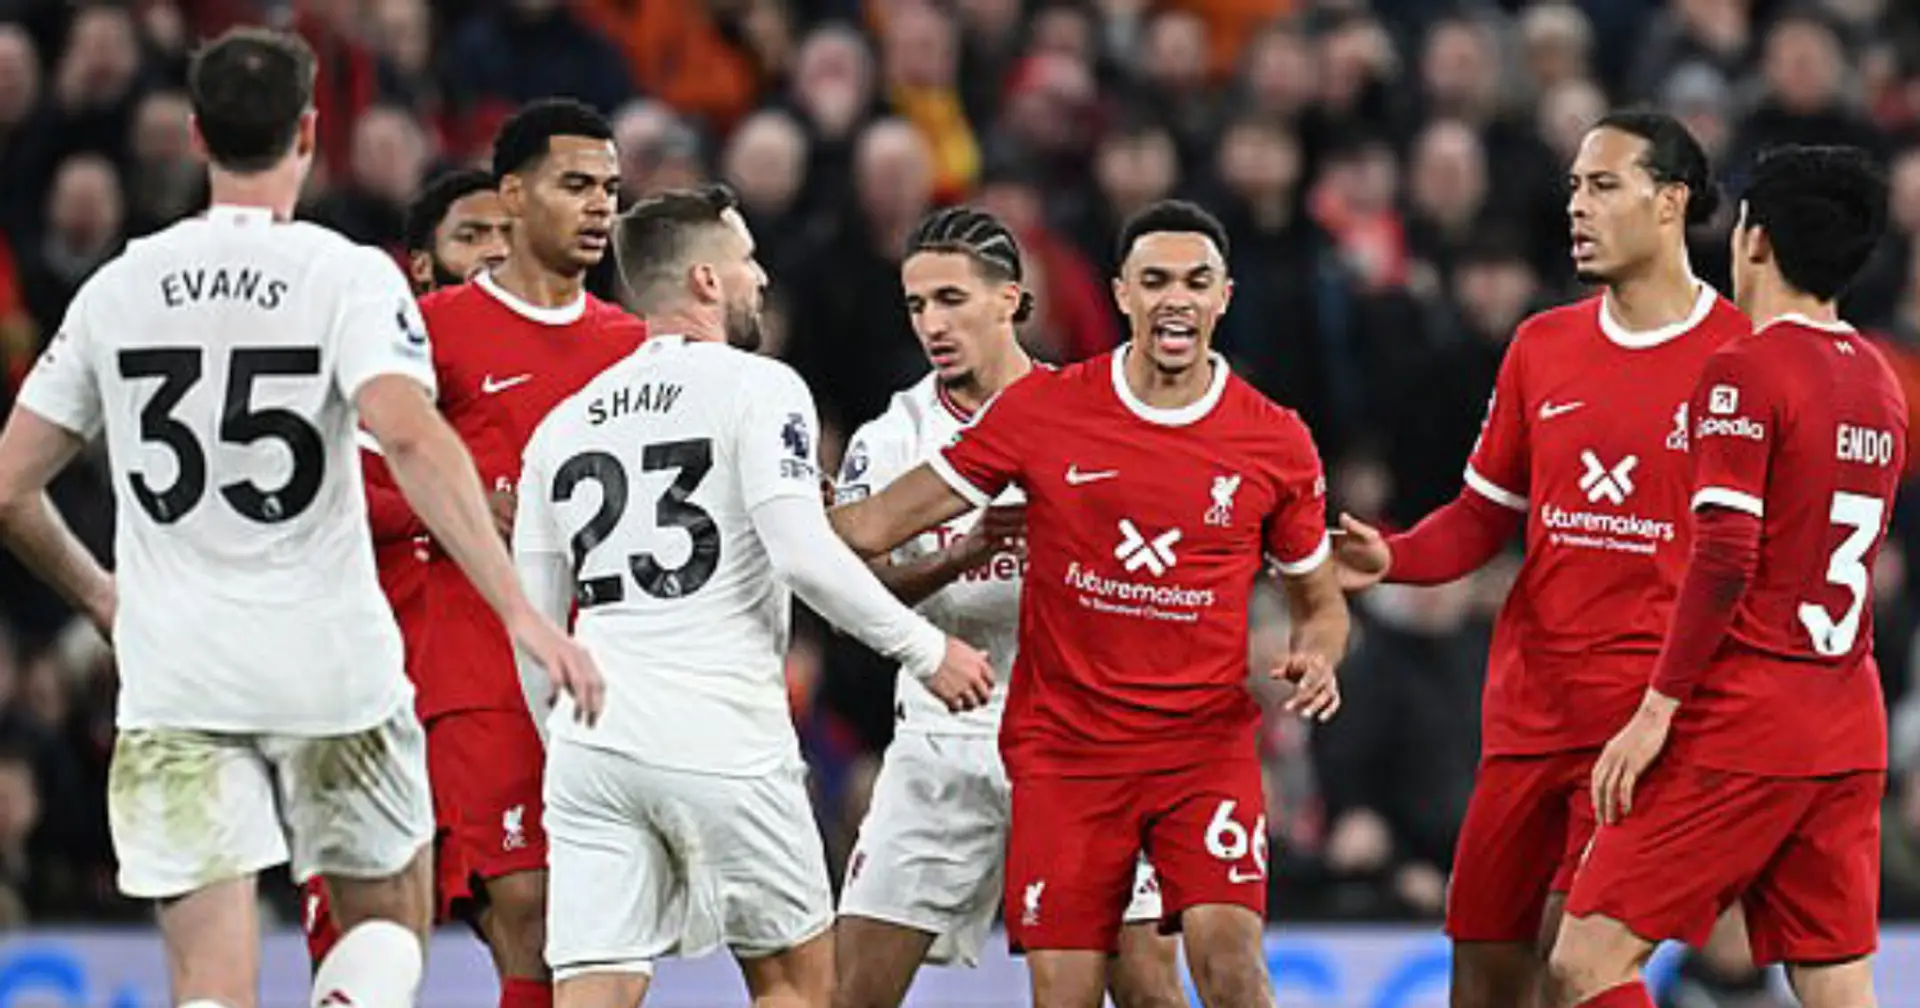 'They won't be this s*** against us. It'll be a proper war': Arsenal fans react to Liverpool's draw with Man United